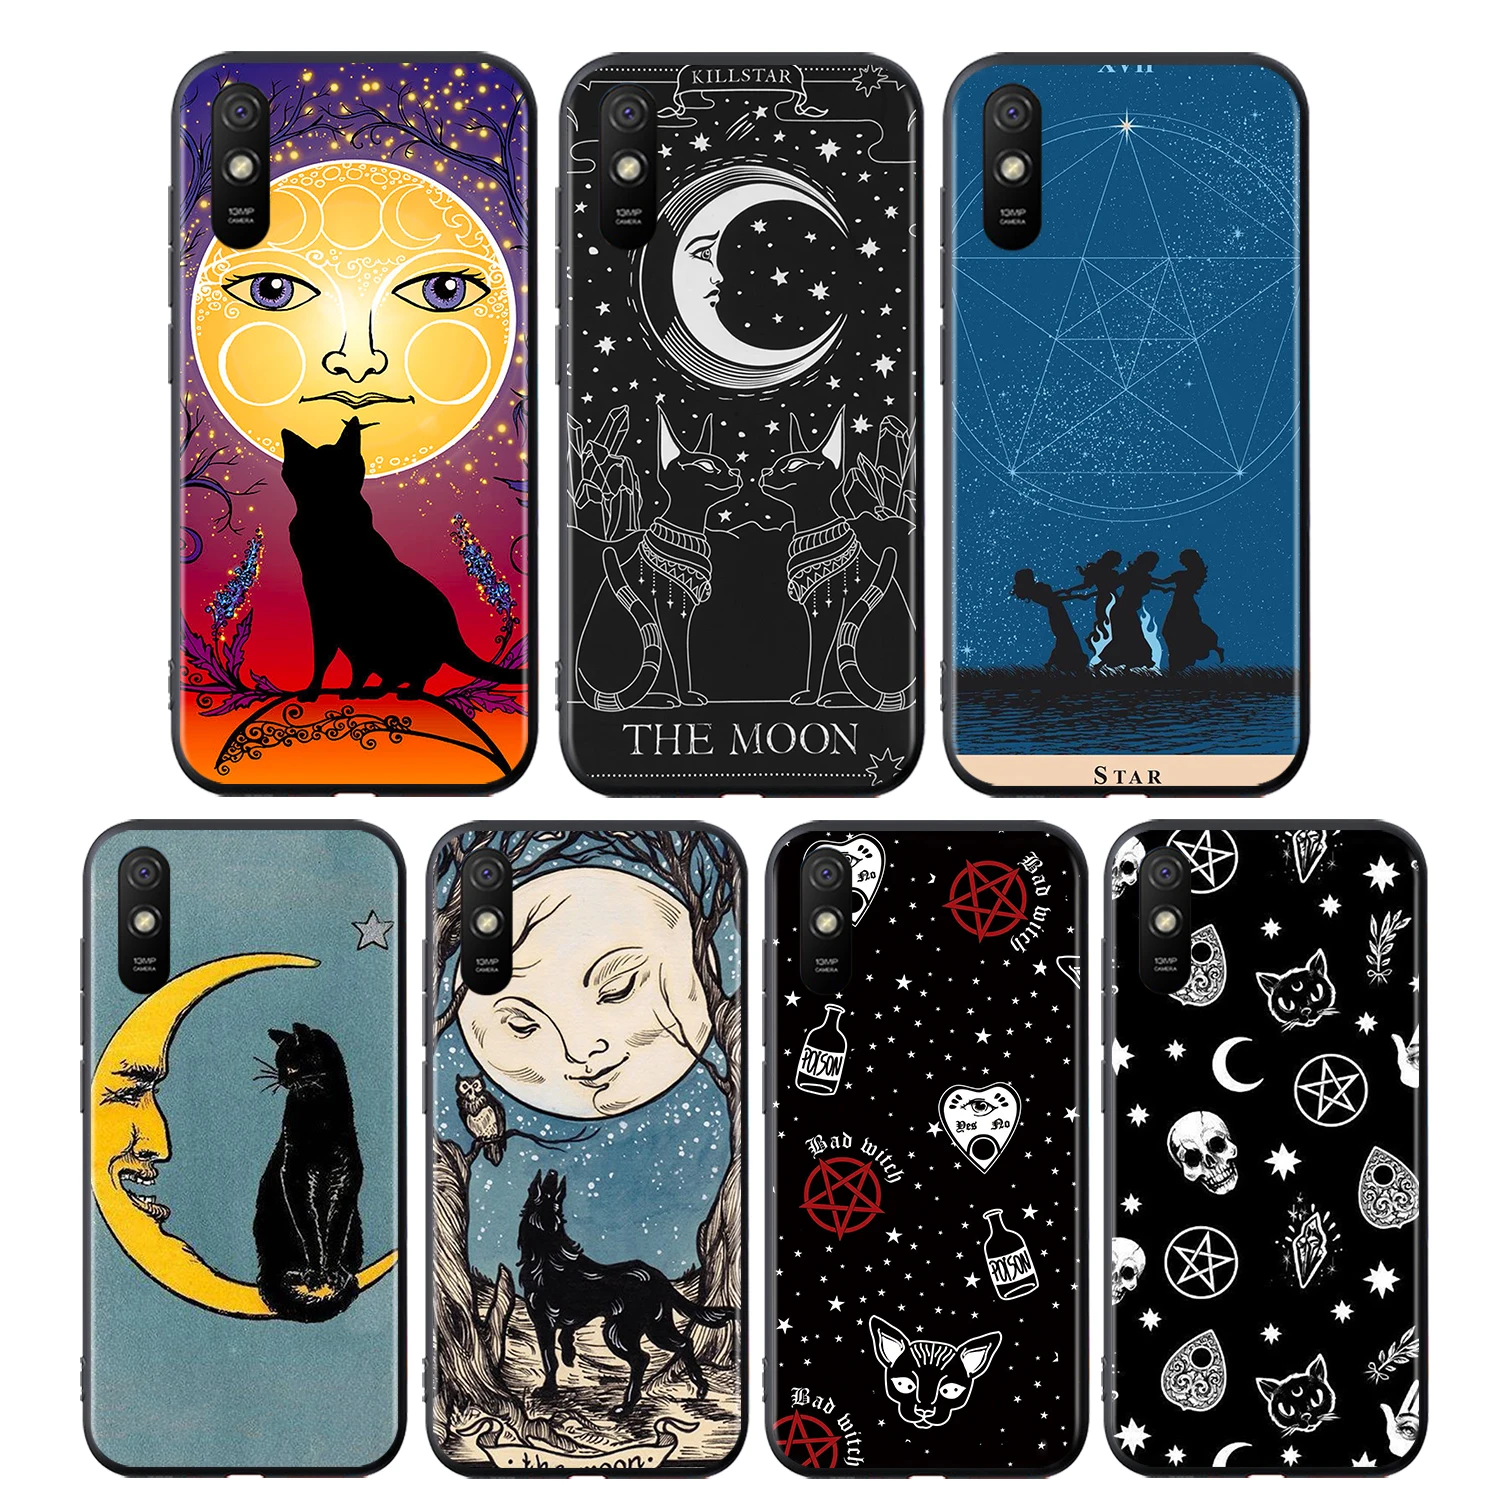 

Witches Moon Tarot Totem Silicone Cover For Xiaomi Redmi 10 9 9T 9C 8 7 6 Pro 9AT 9A 8A 7A 6A S2 GO 5 5A 4X Plus Phone Case